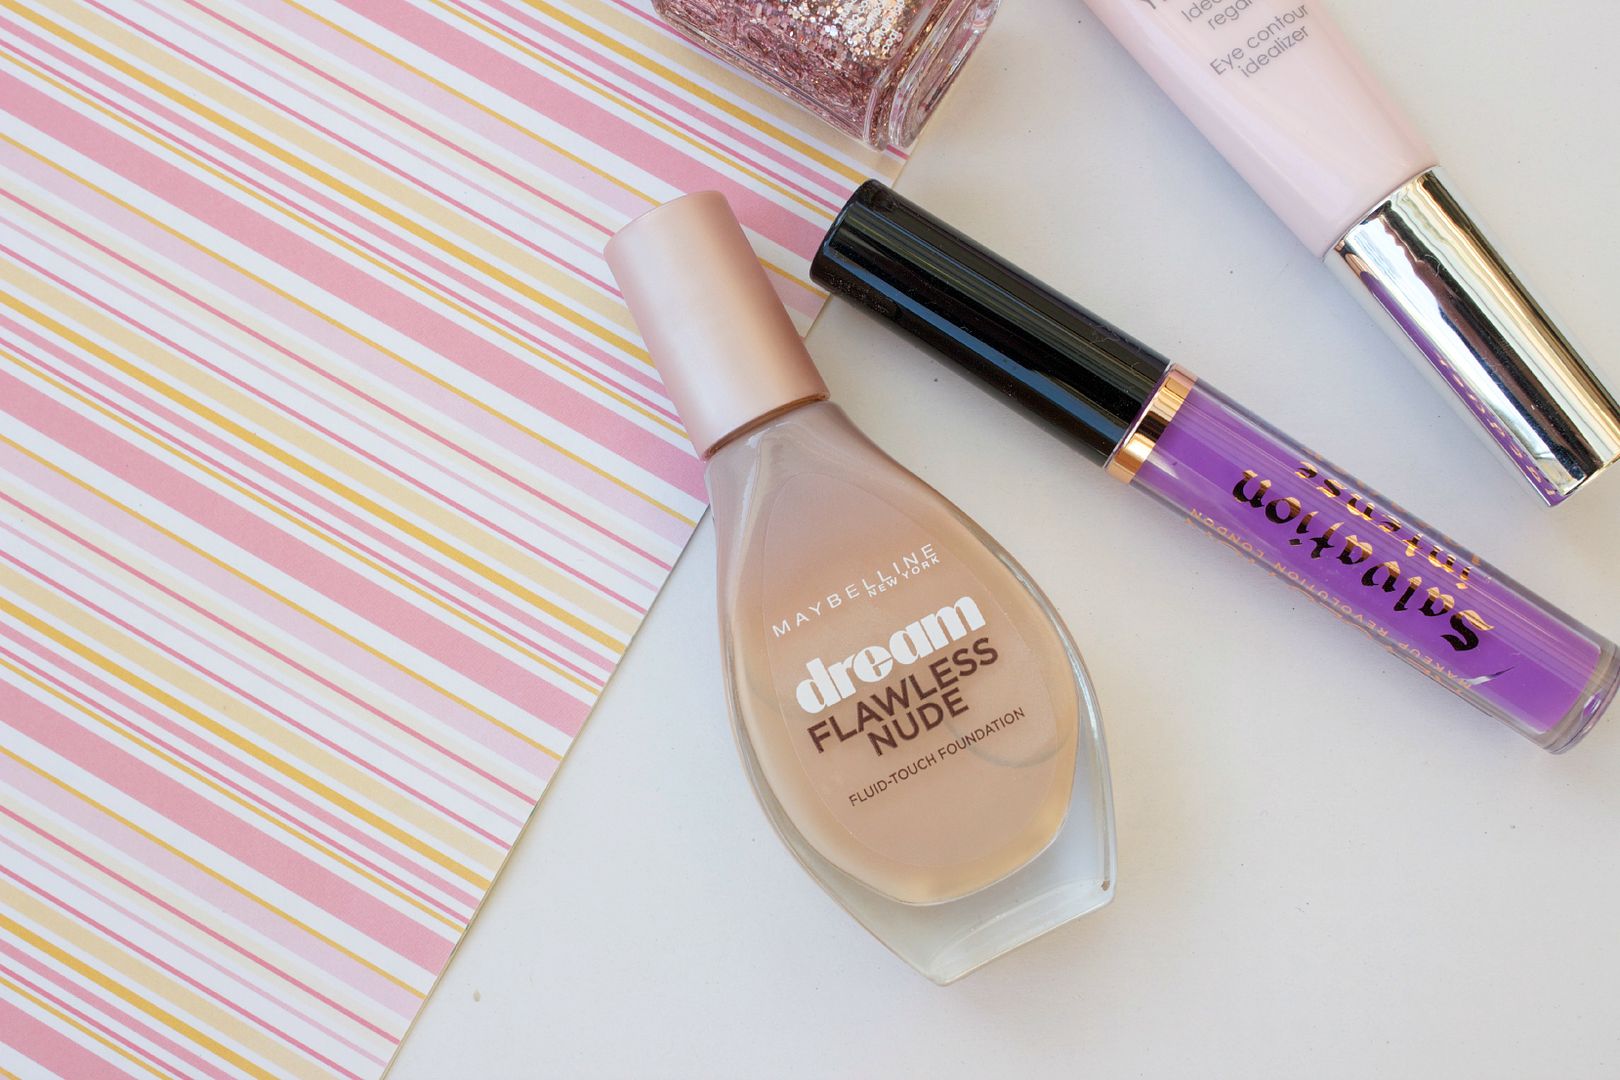 Maybelline Dream Flawless Nude Fluid-Touch Foundation